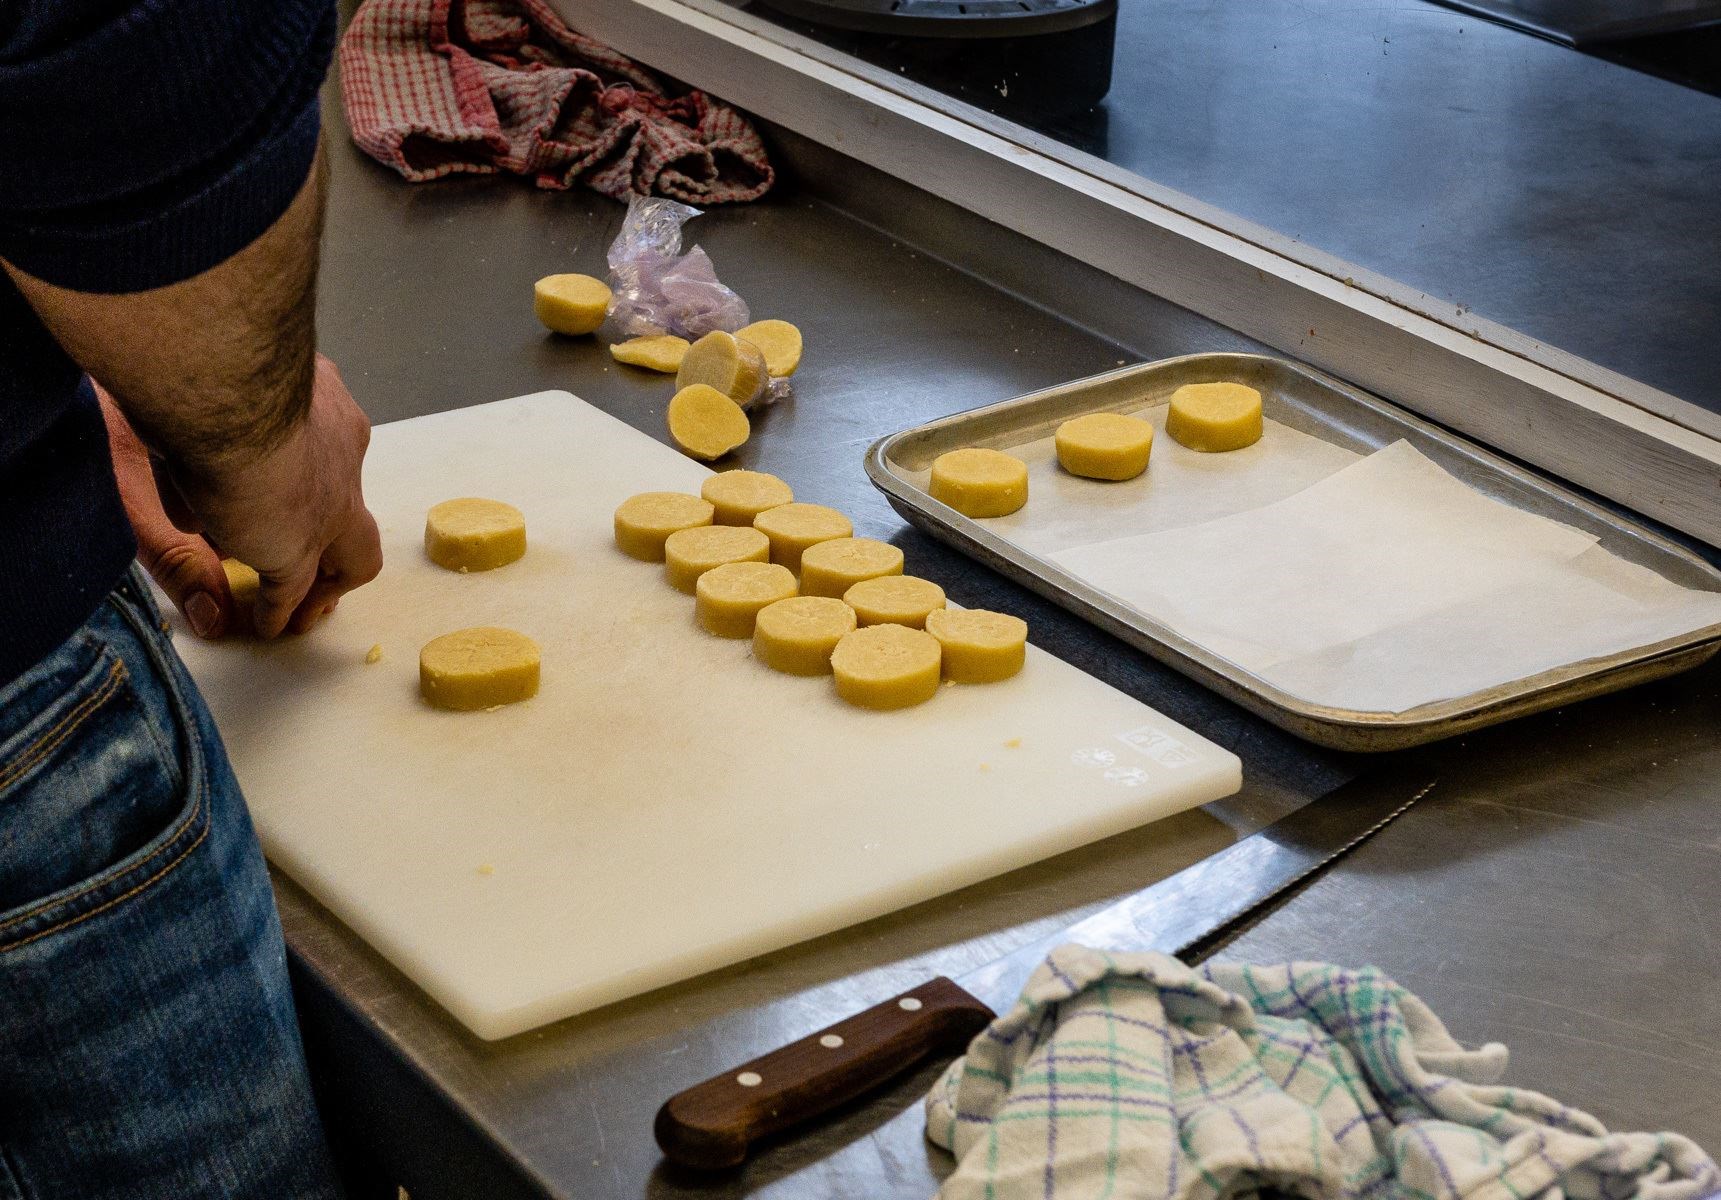 Preparing shortbread at one of the regional heats. Picture by Andy Kirby.